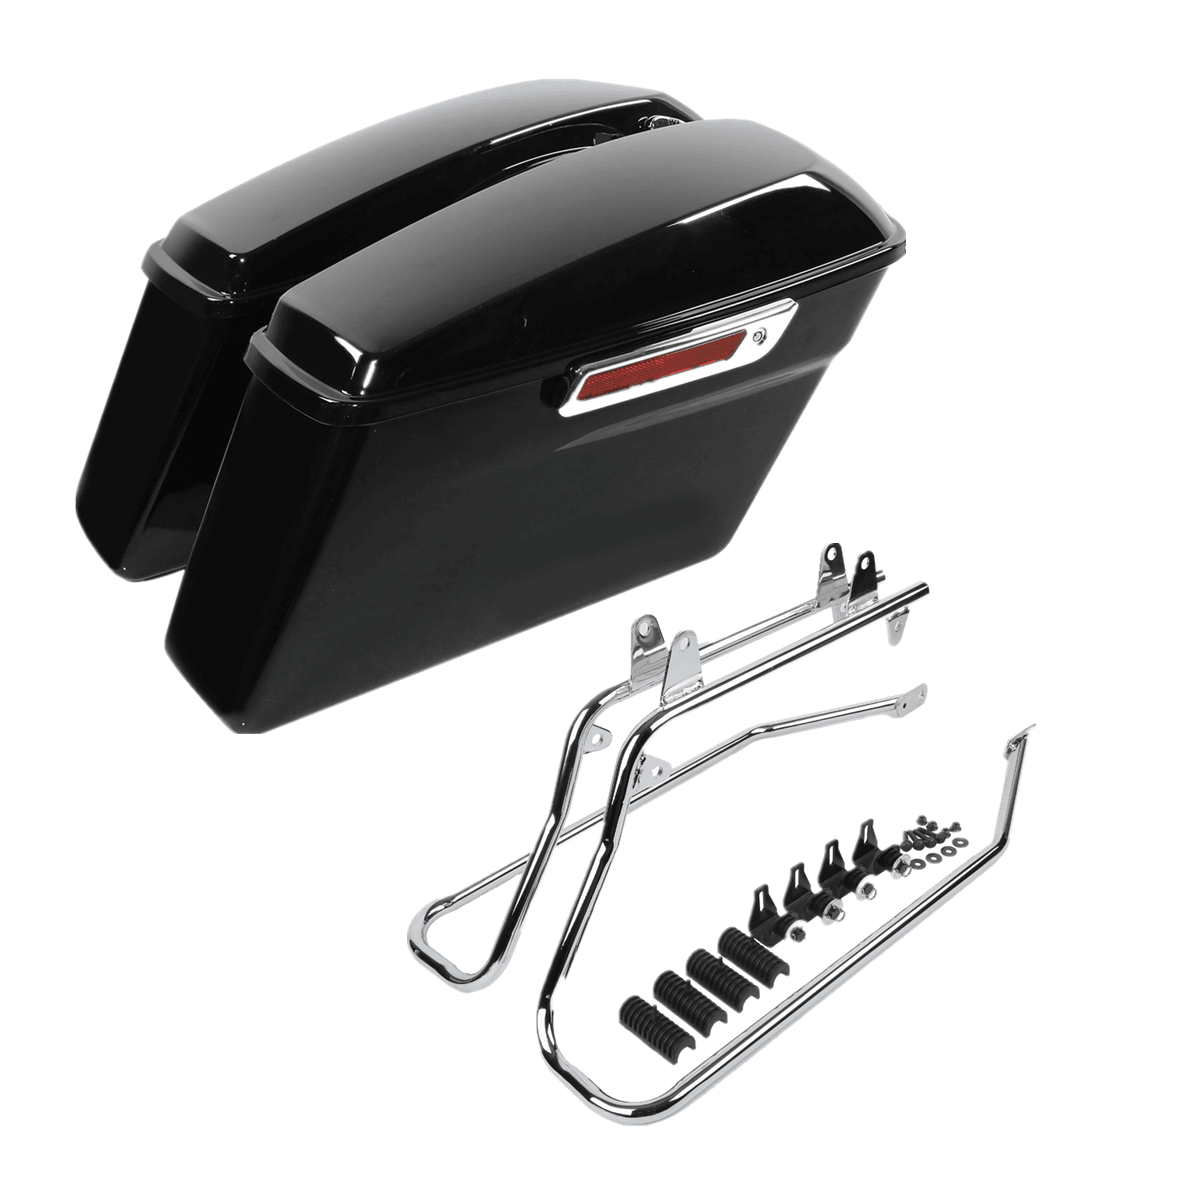 Saddlebags Saddle Bags W/ Conversion Brackets Fit For Harley Softail Heritage - Moto Life Products